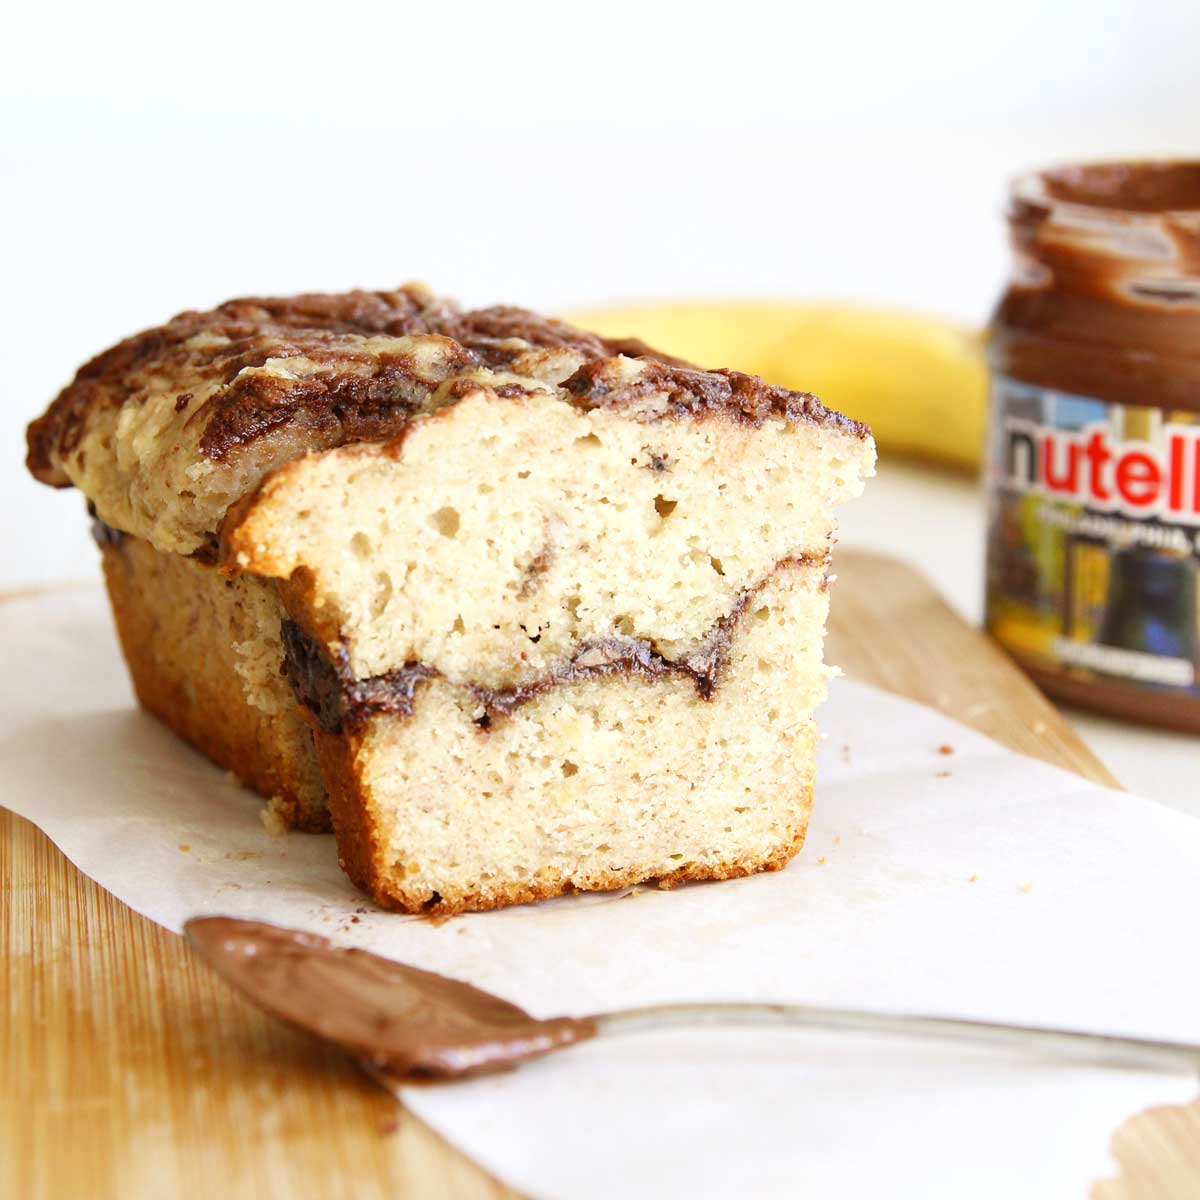 Super Moist Nutella Stuffed Banana Bread with Olive Oil & Almond Flour - Frosting